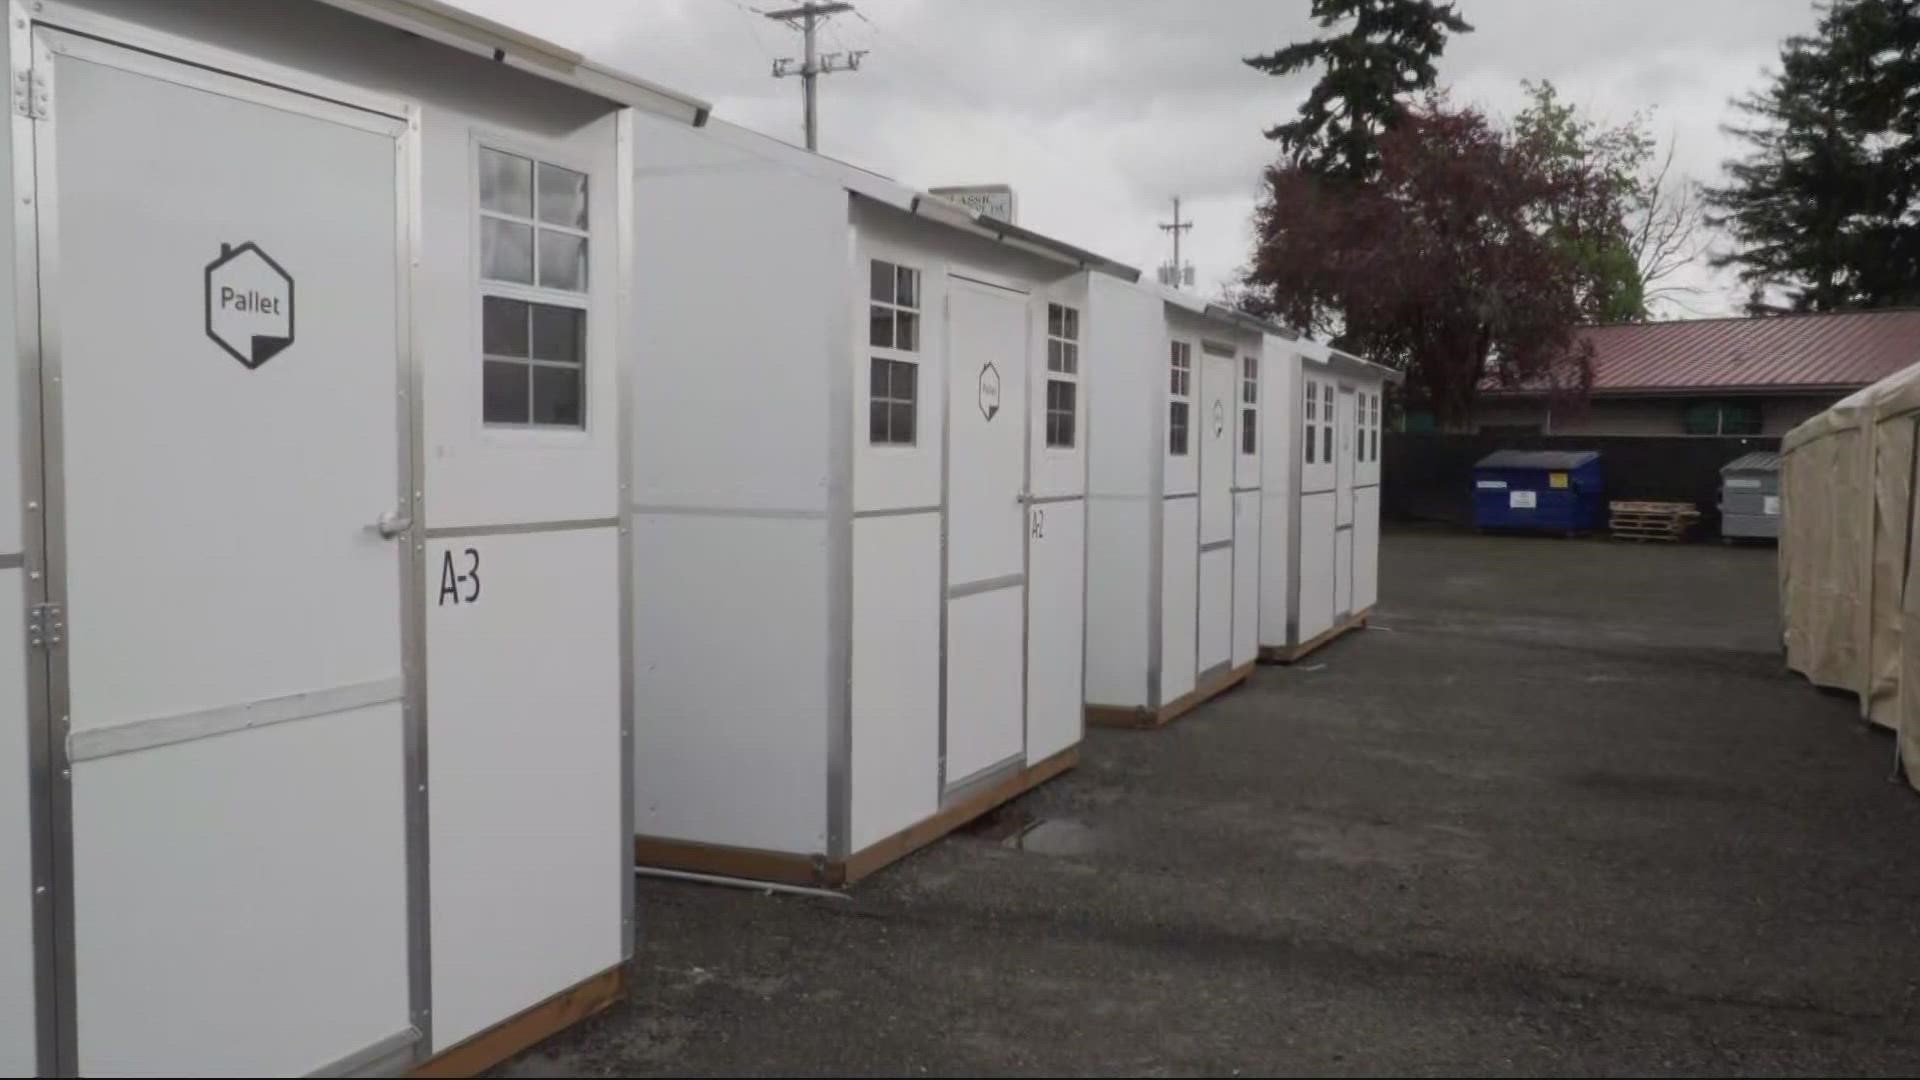 Vancouver is considering a third location for a Safe Stay Community for the homeless. It’s still tentative but the prospect of it concerns some neighbors.